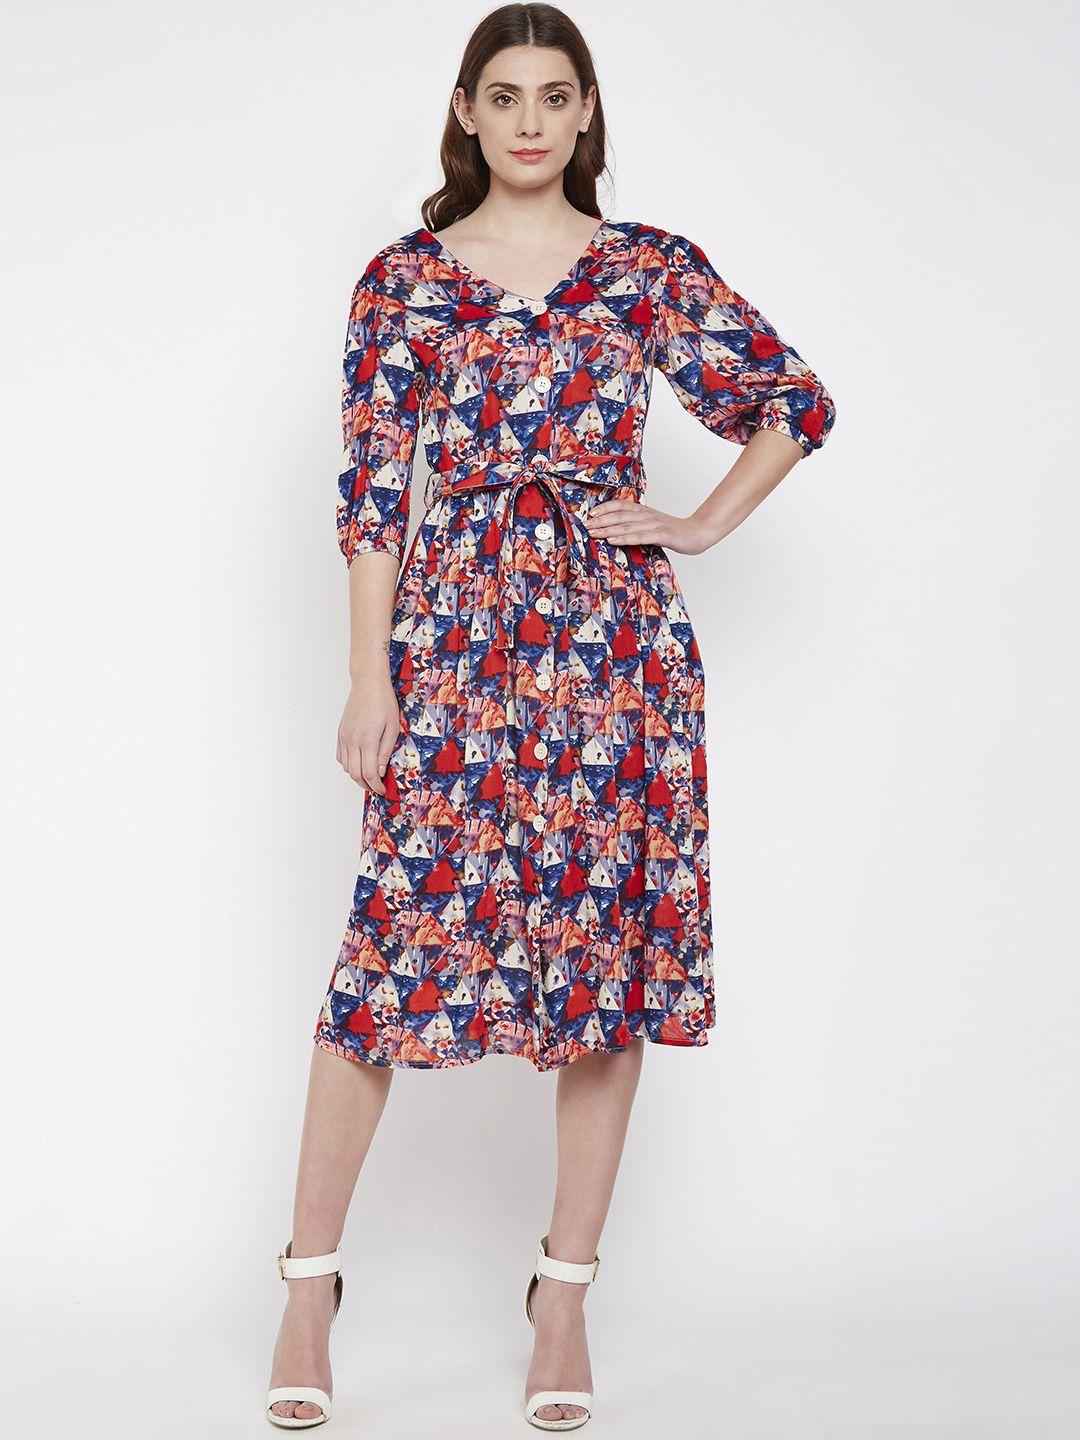 oxolloxo women multicoloured printed fit and flare dress